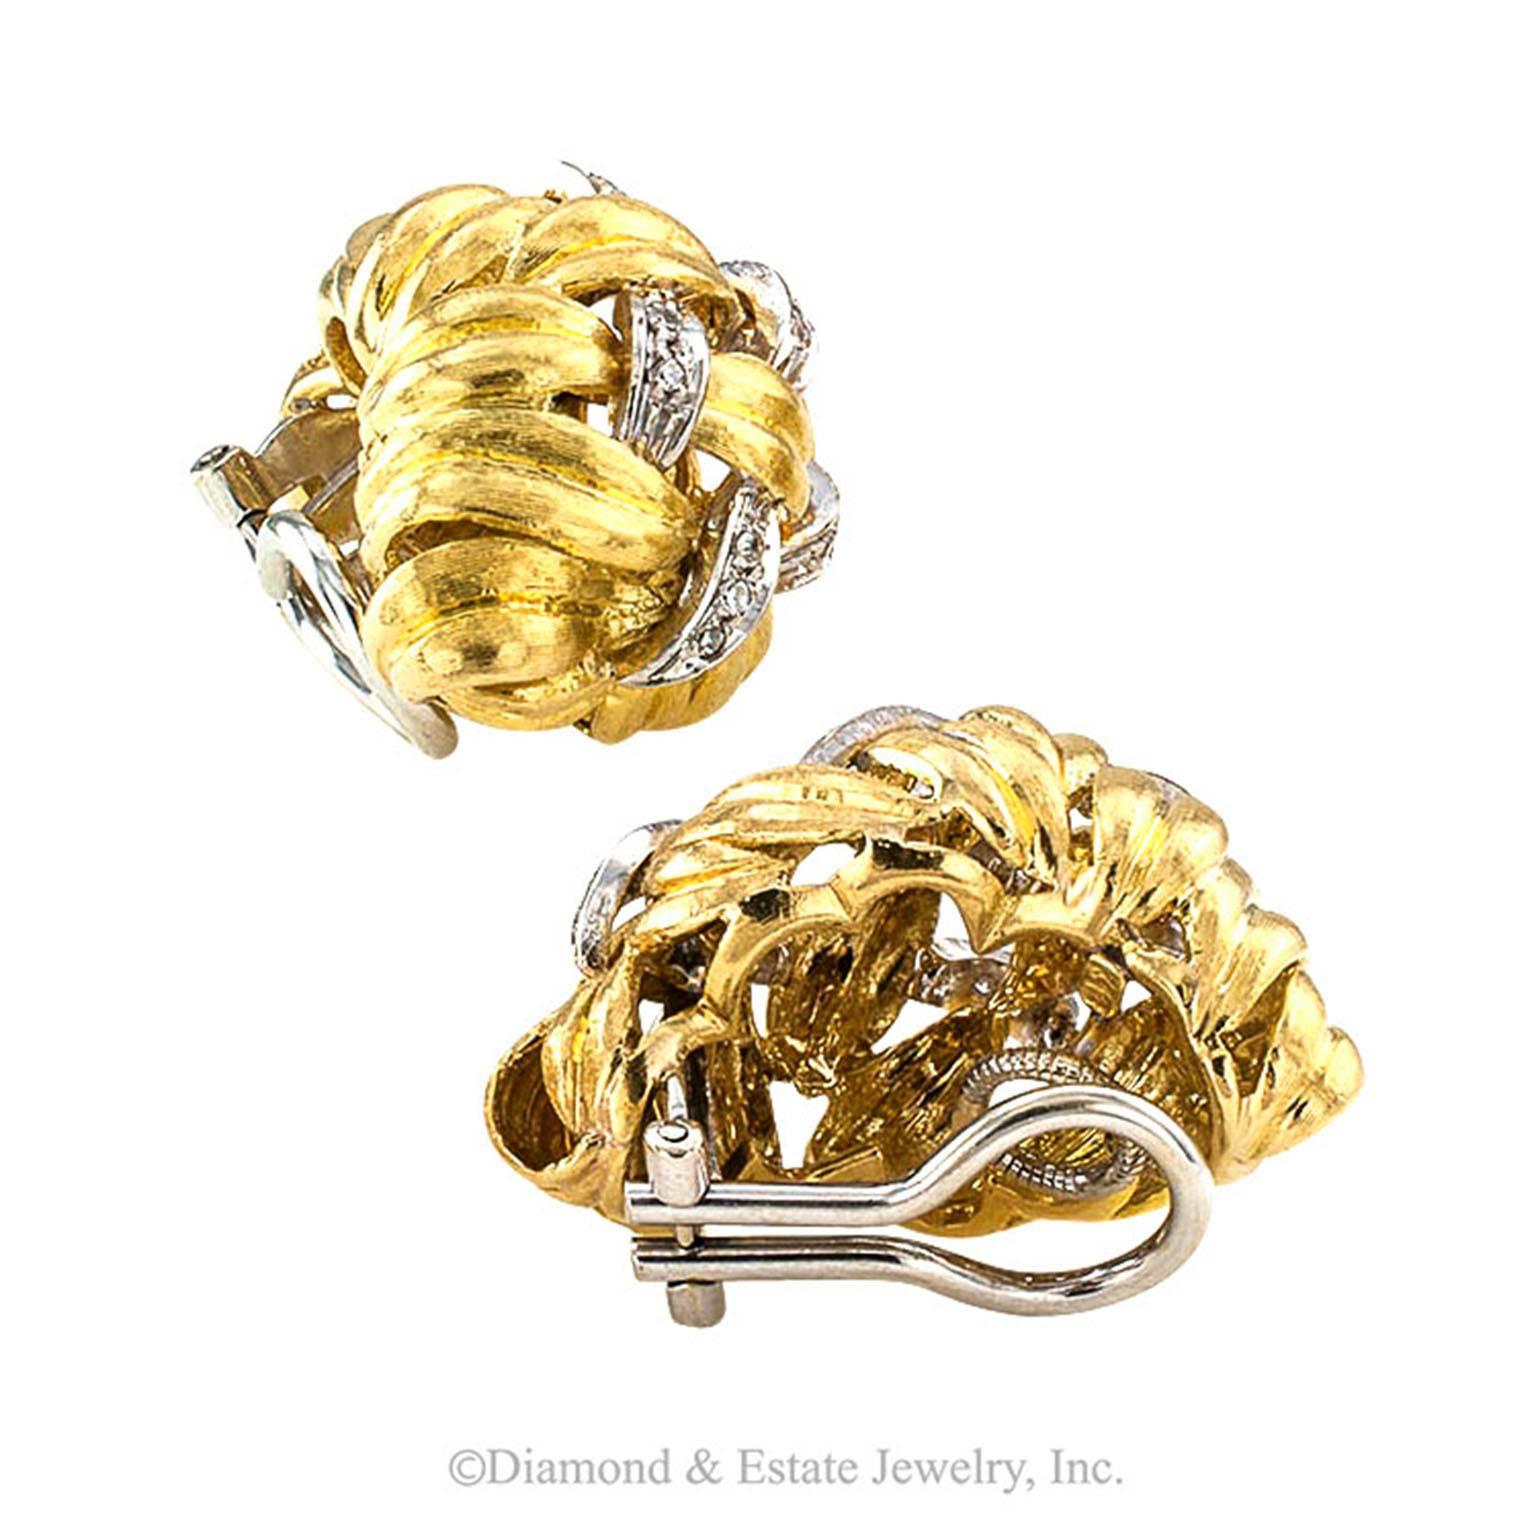 Diamond Gold Domed Basket Weave Ear Clips

The Florentine finish gives the gold a rich satin look in this basket weave design accented with diamonds totaling approximately 1/3 carat.  A very good example of good jewelry that looks a lot more